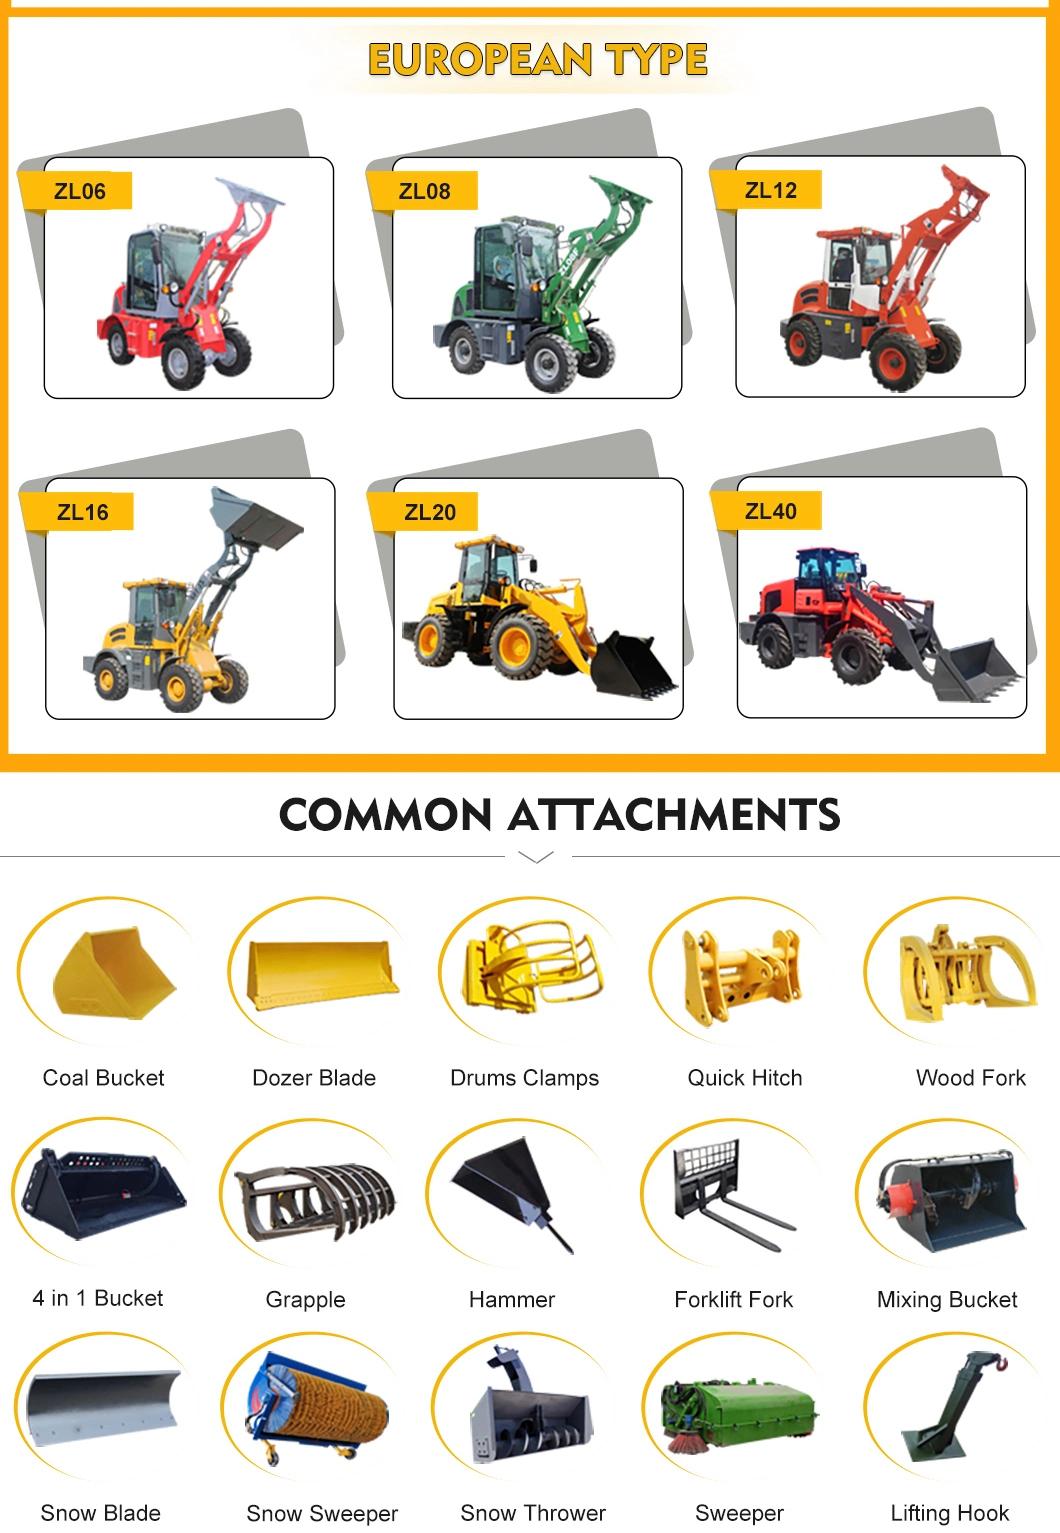 Middle and Small Sized 2ton Wheel Loader Shandong Machinery Co Ltd Loader